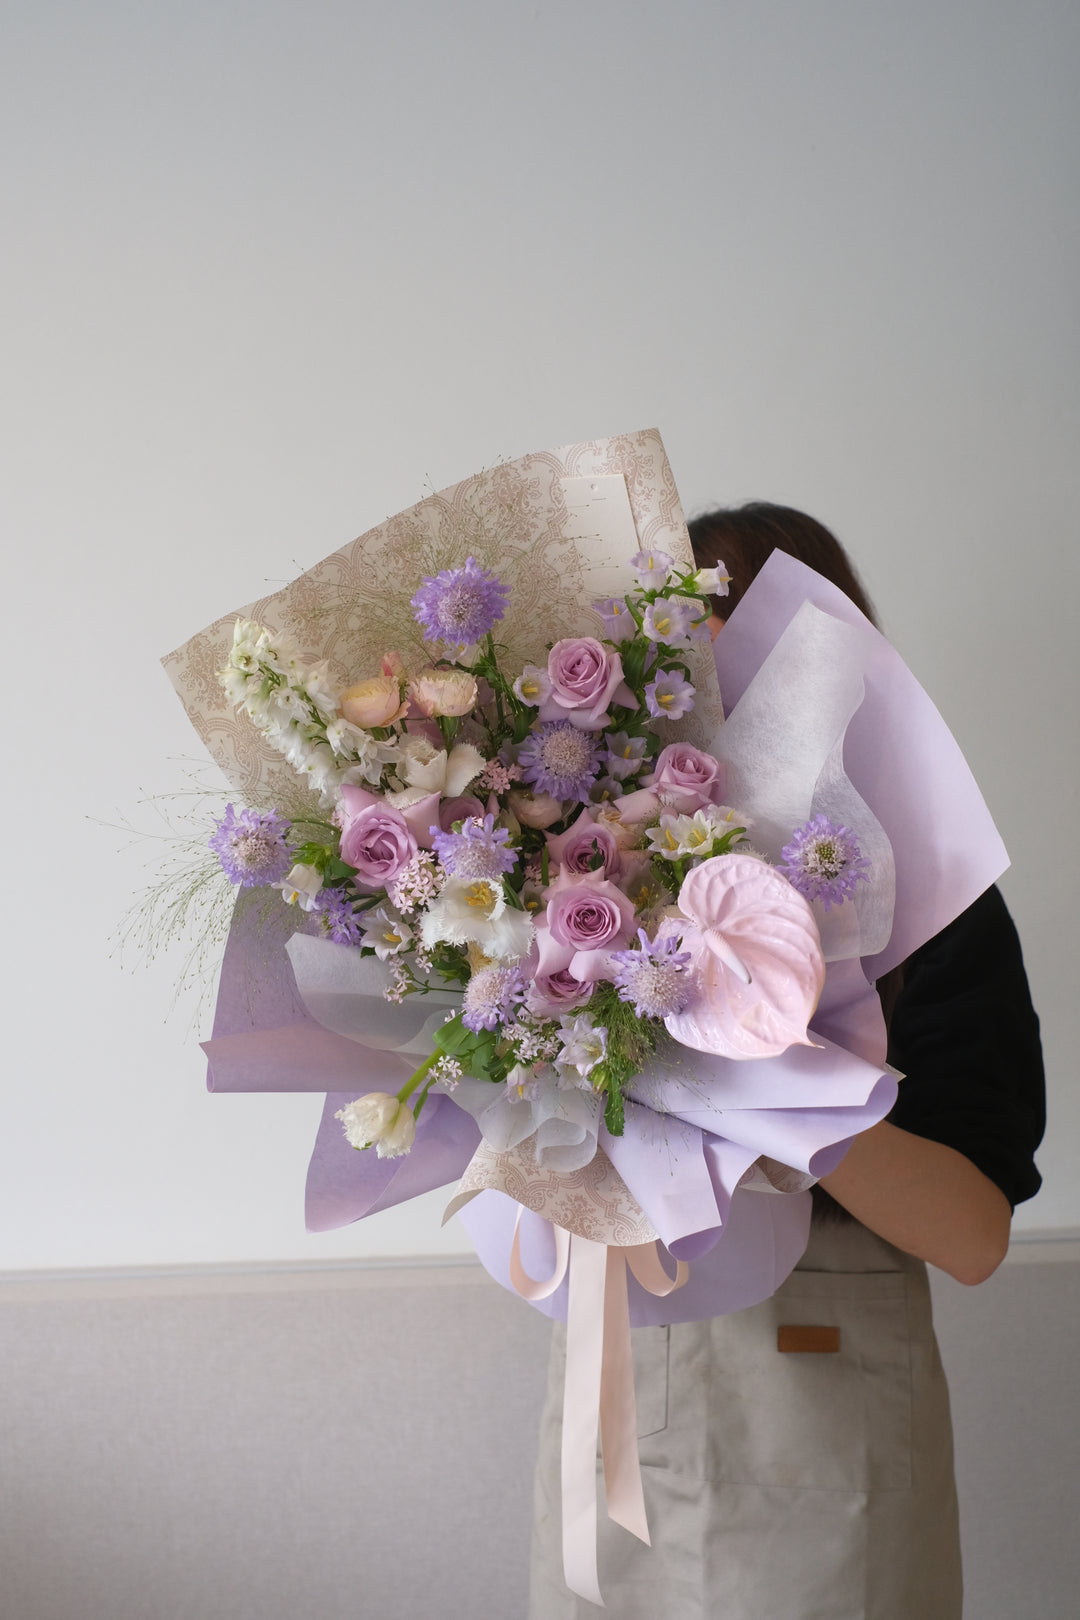 "Exquisite omakase arrangement of purple flowers for delivery in Penang Island."